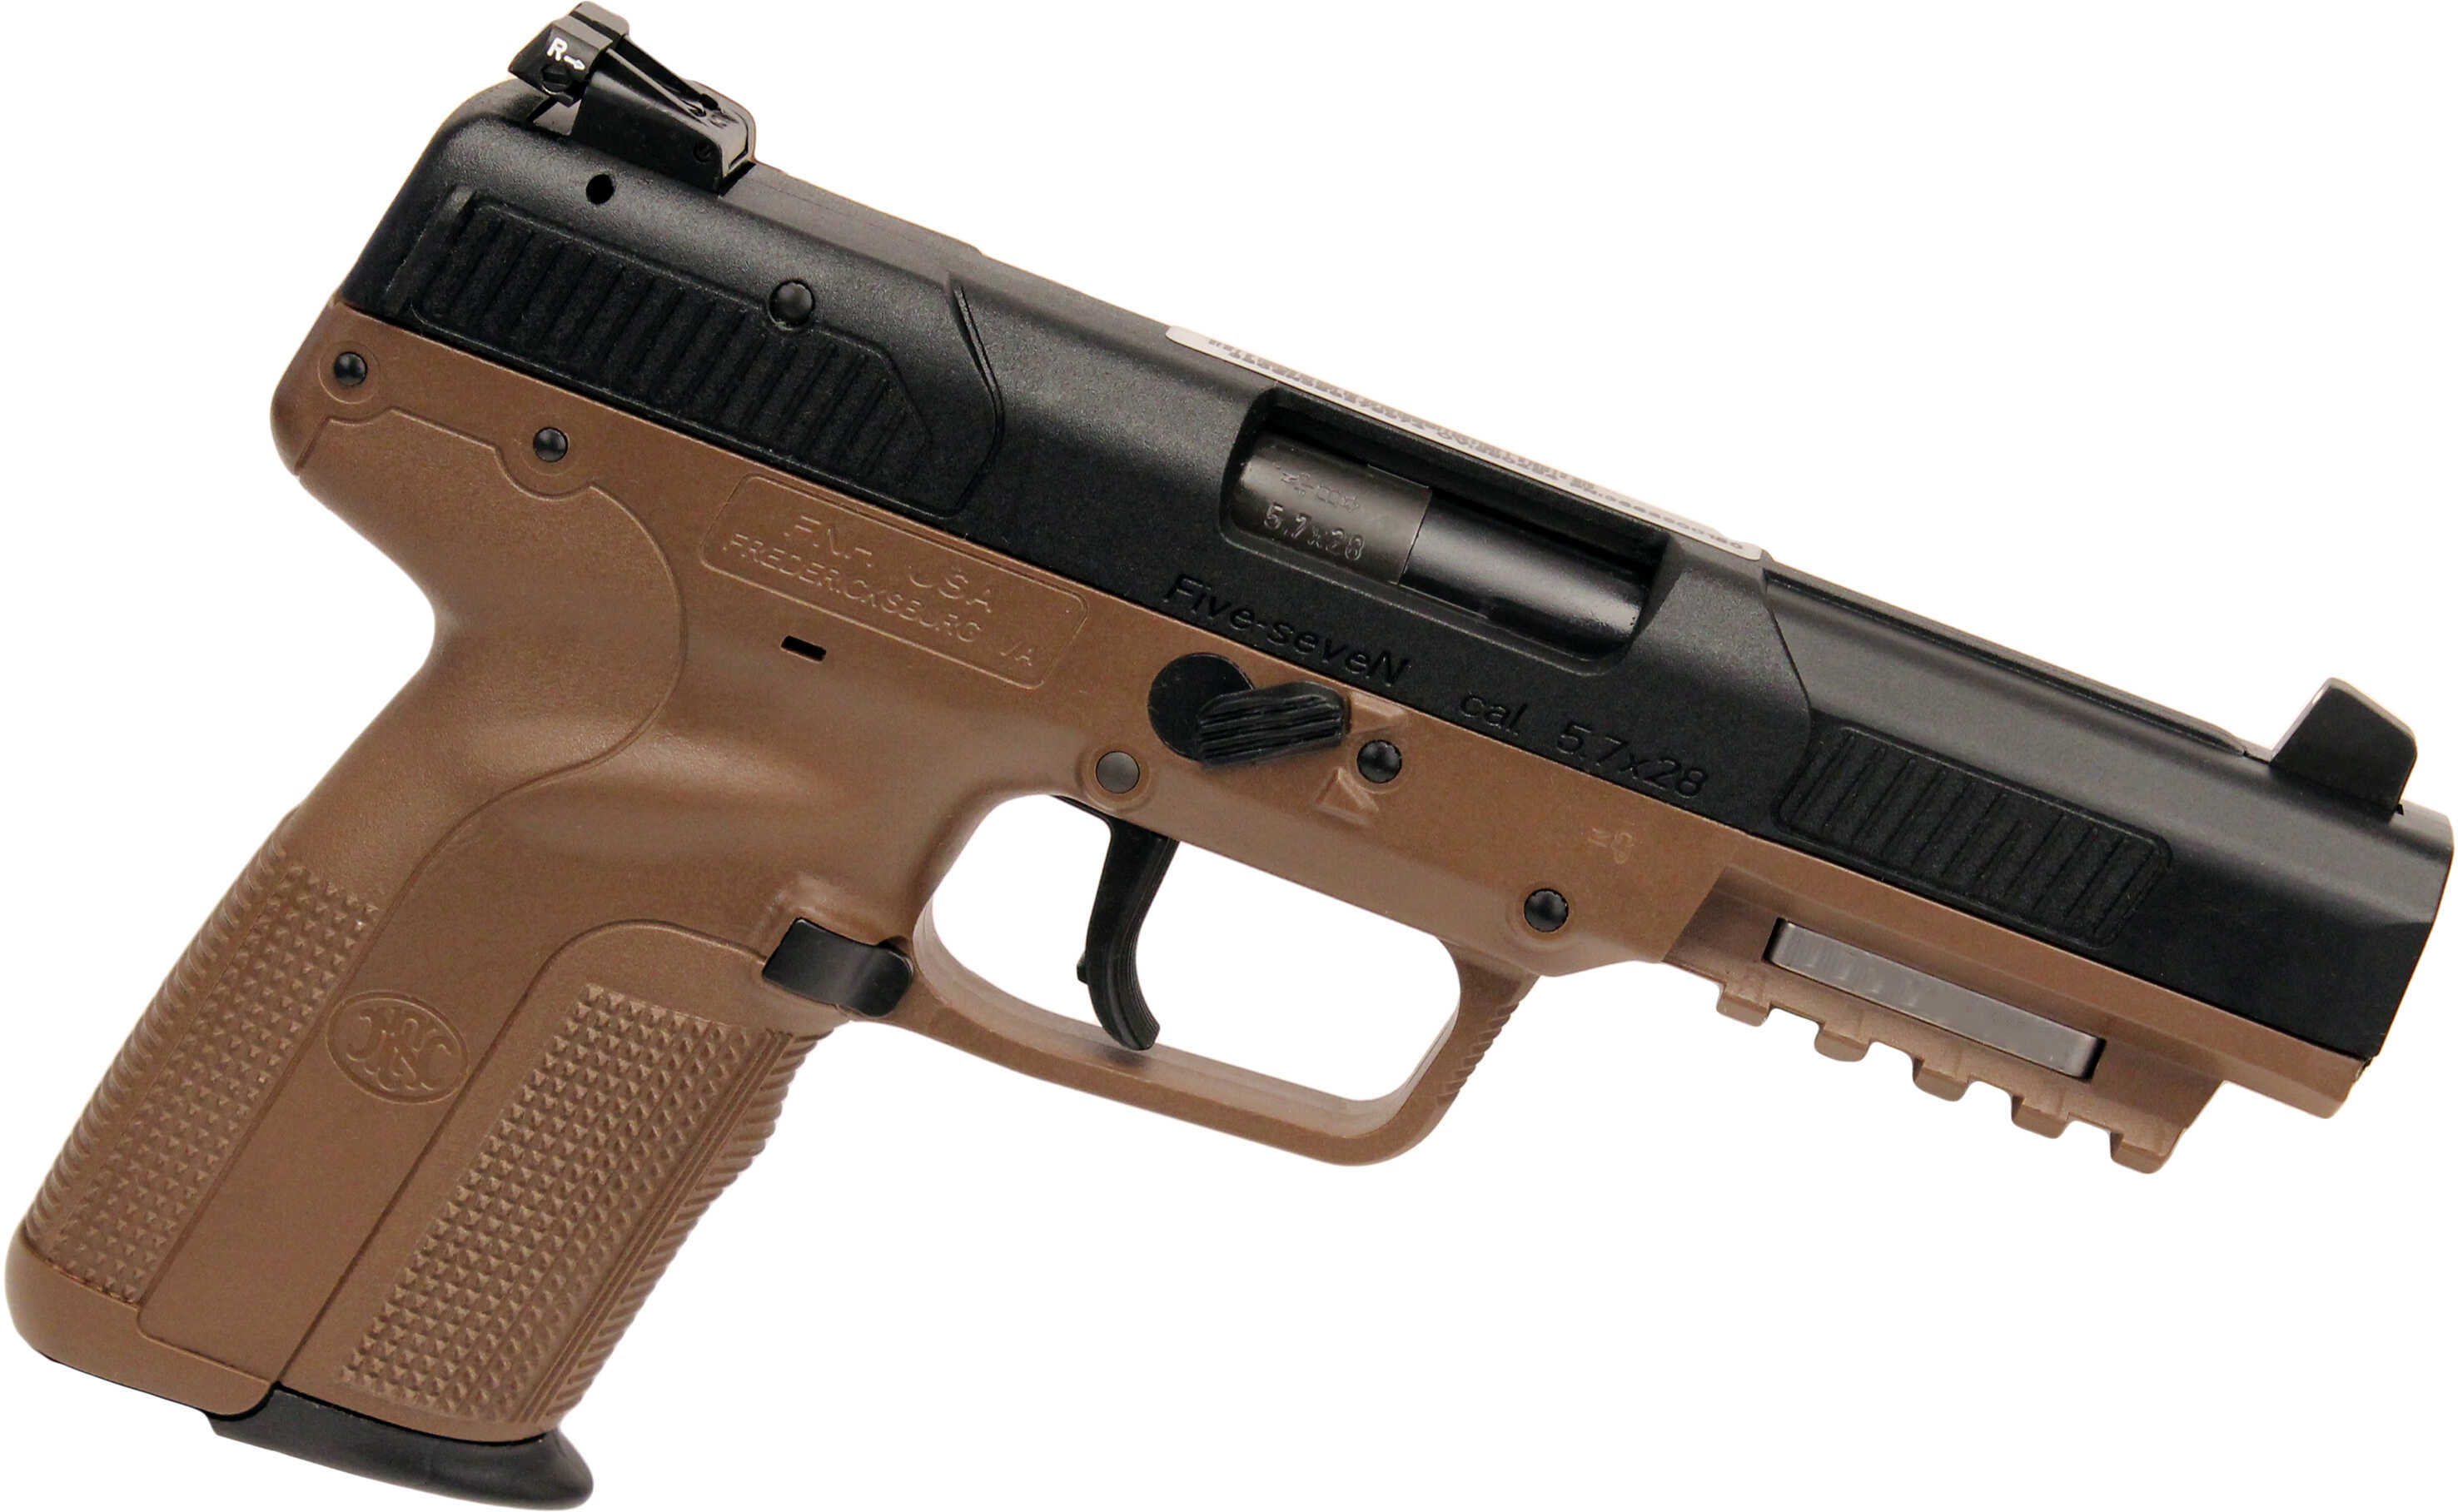 FN Five-seveN FDE Semi Auto Pistol 5.7X28mm with Adjustable Sight and three 10-Round Magazines